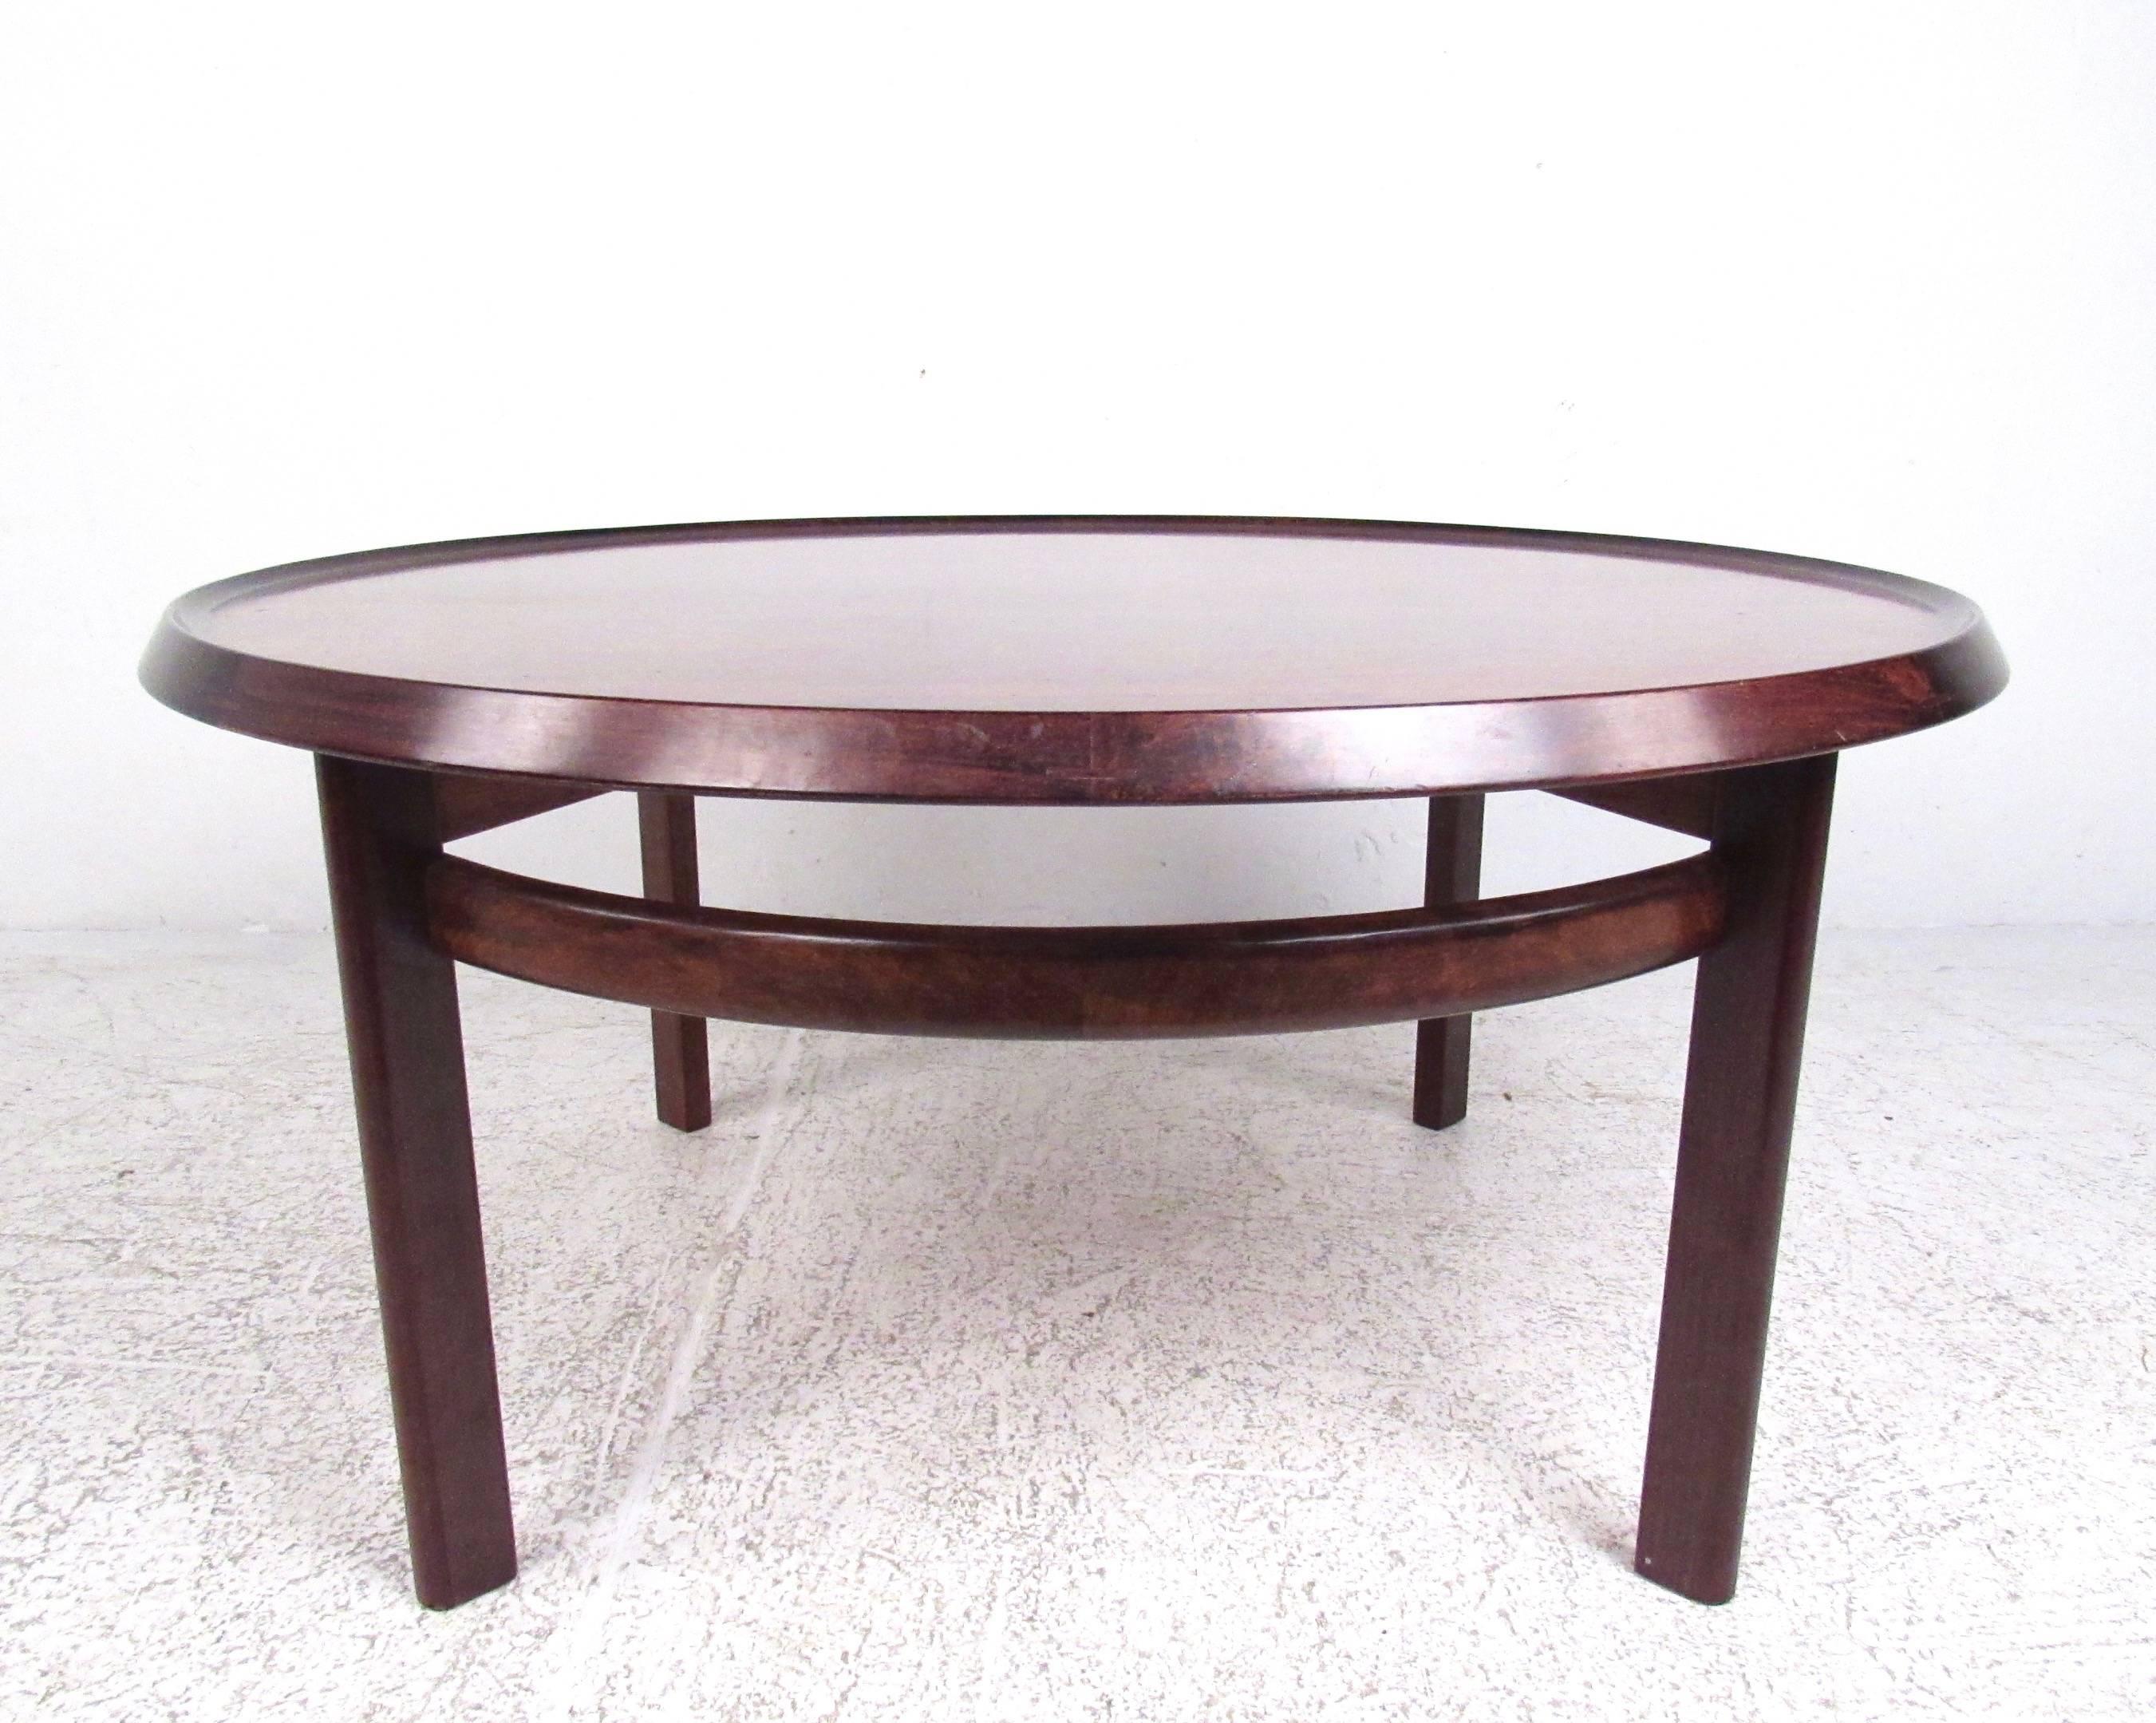 This stylish Mid-Century Modern coffee table features the Scandinavian Modern design of Haug Snekkeri for Bruksbo. Rich vintage rosewood finish, sturdy vintage construction, and unique raised edge all add to the appeal of this circular cocktail